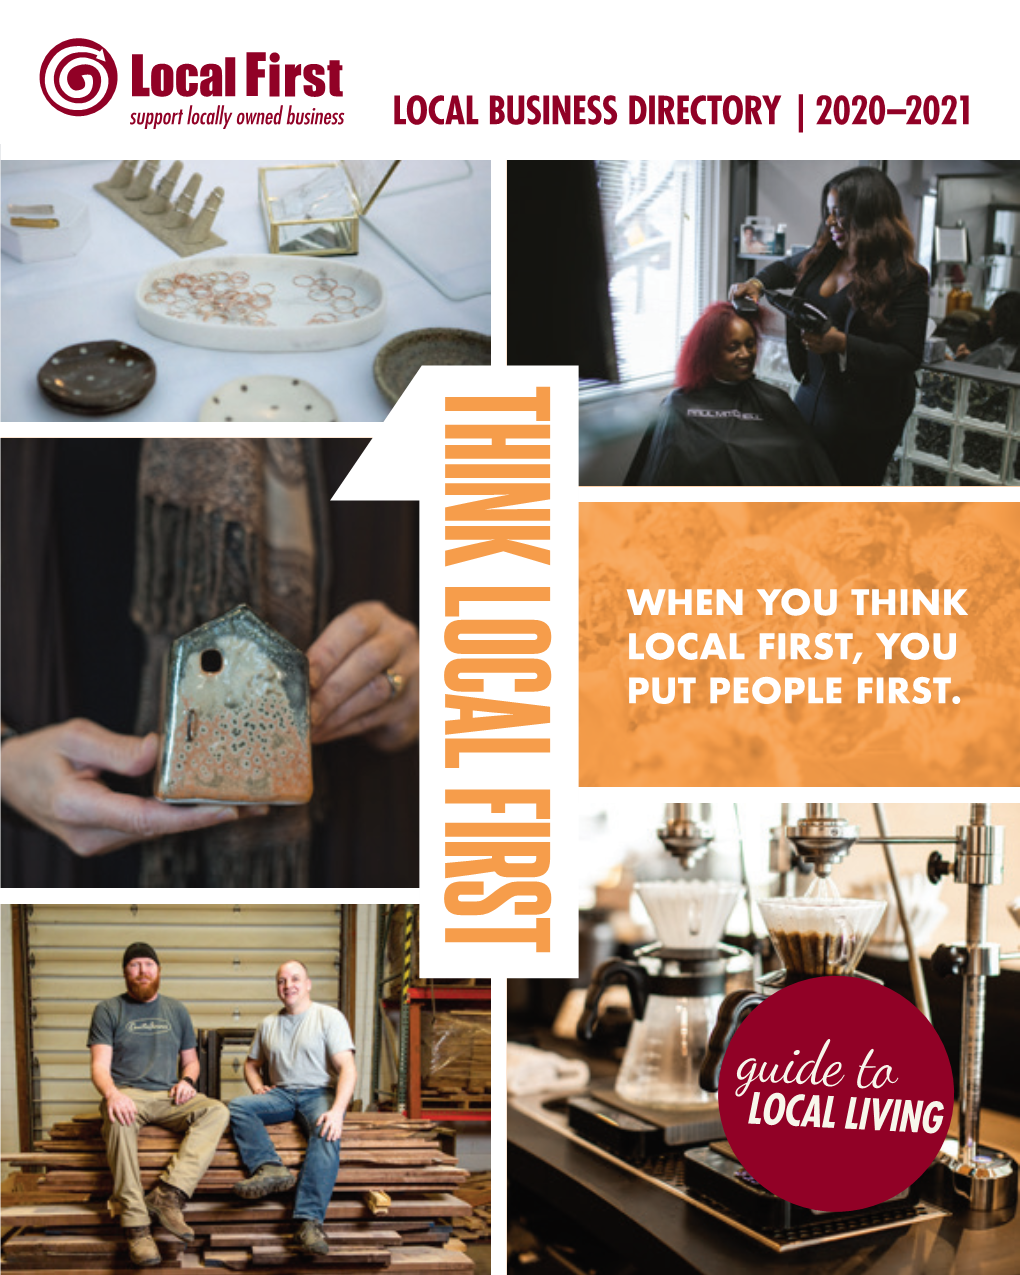 Download the Guide to Local Living